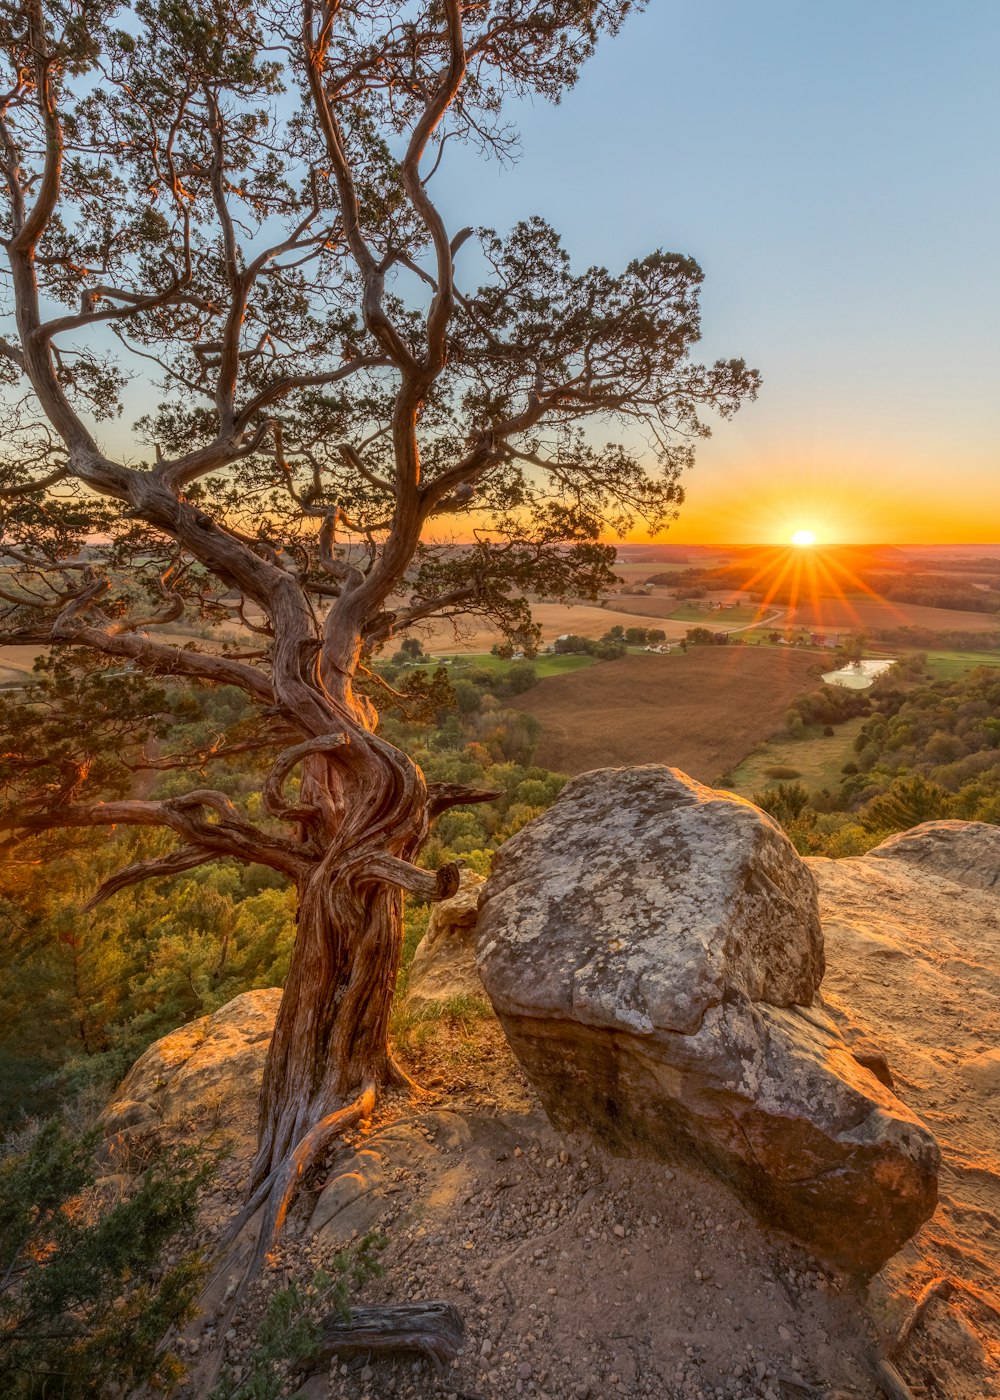 a tree on top of a rock with the sun setting in the background